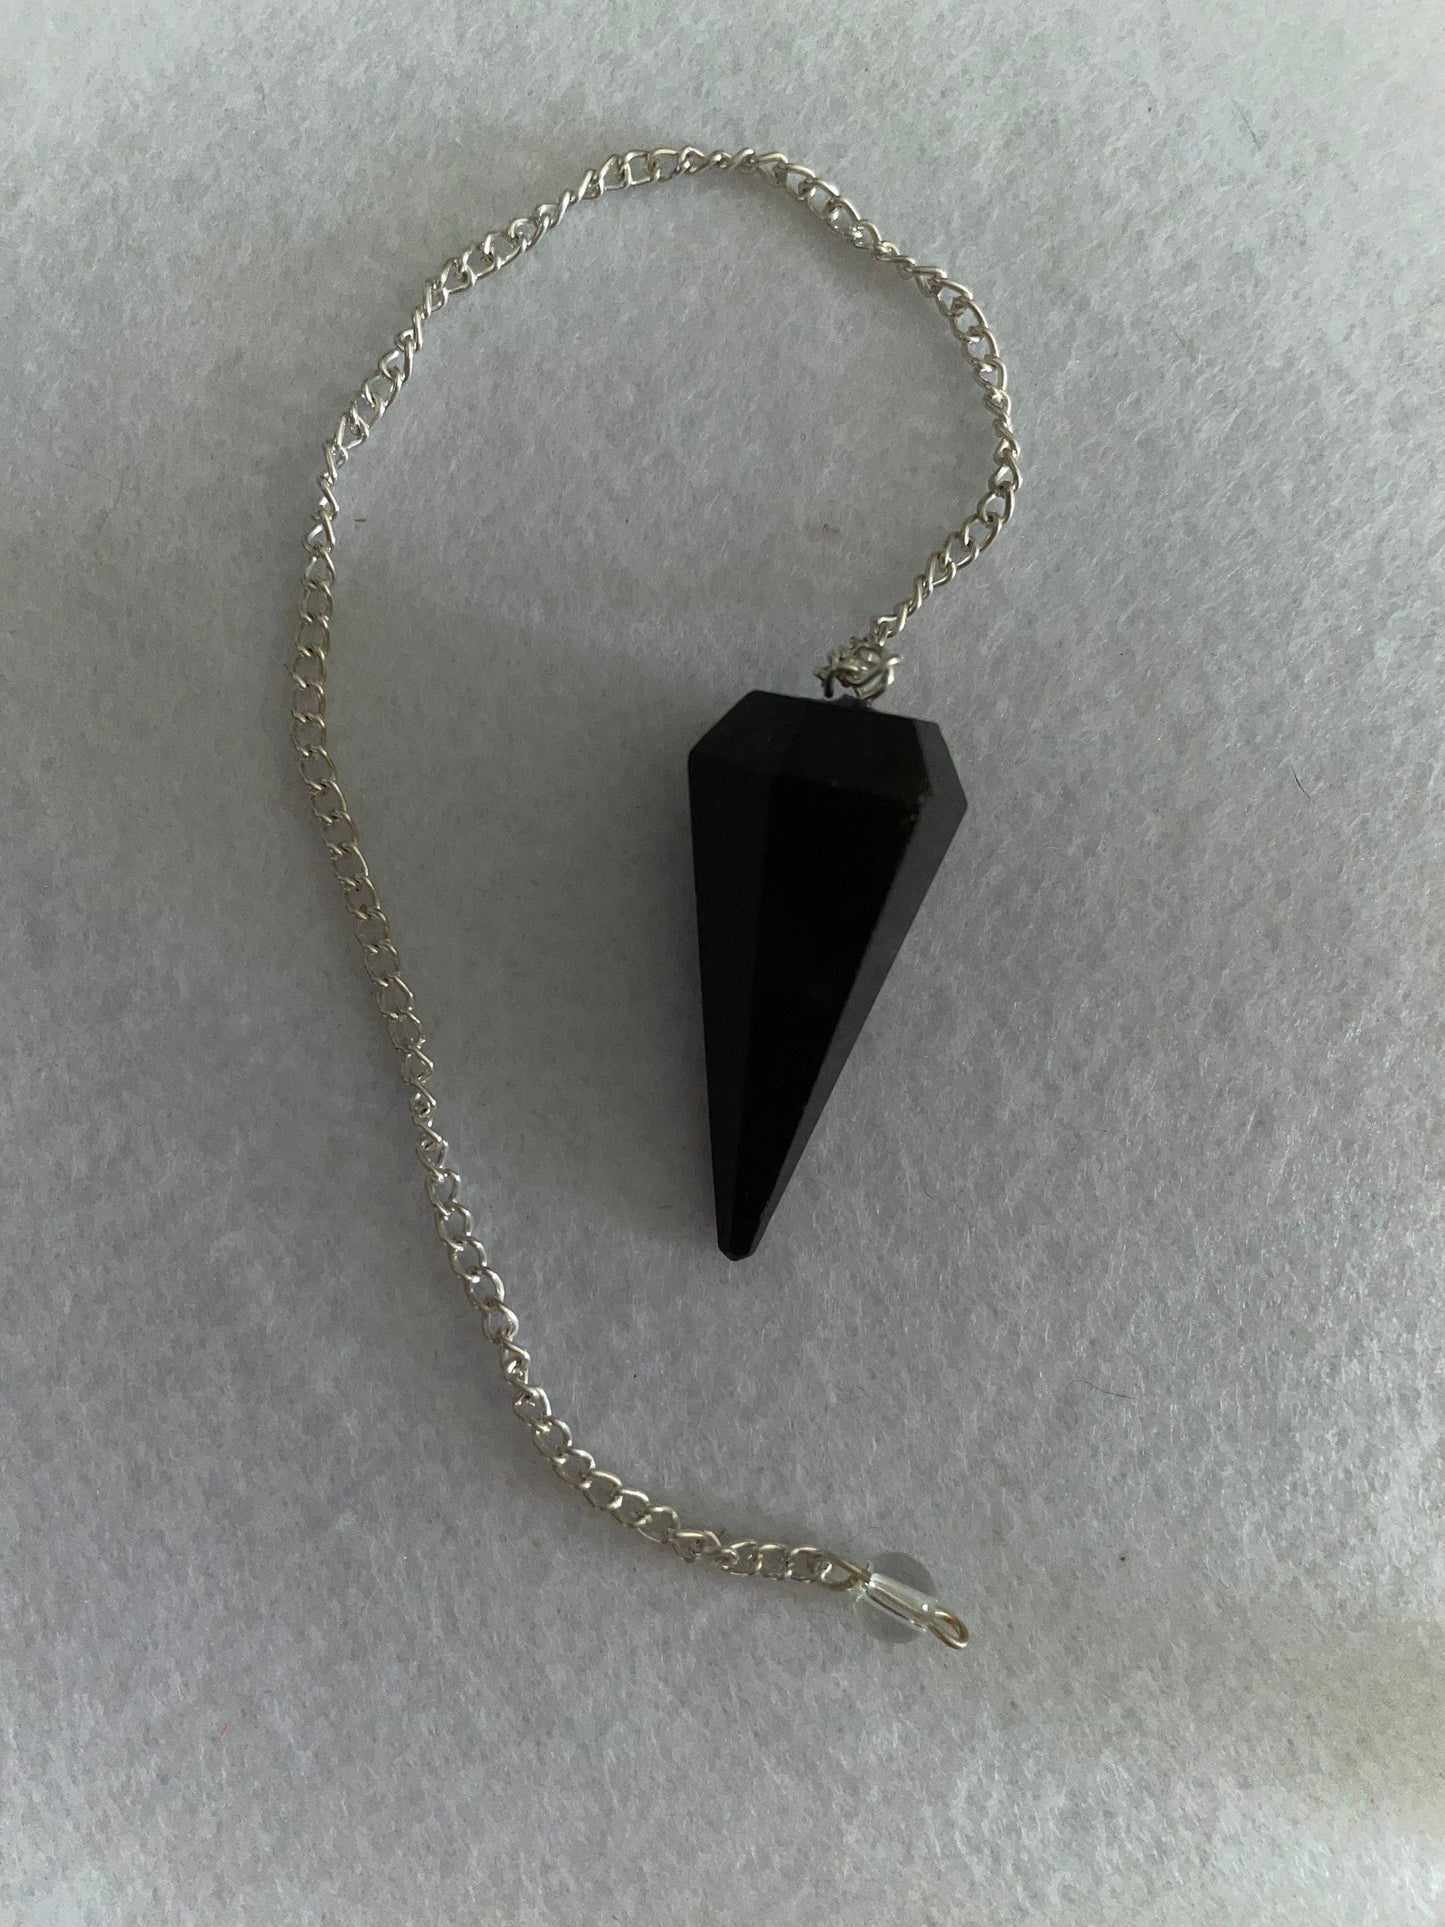 Awesome Black Obsidian Pendulum is  1.5” and with chain is 9”.25”